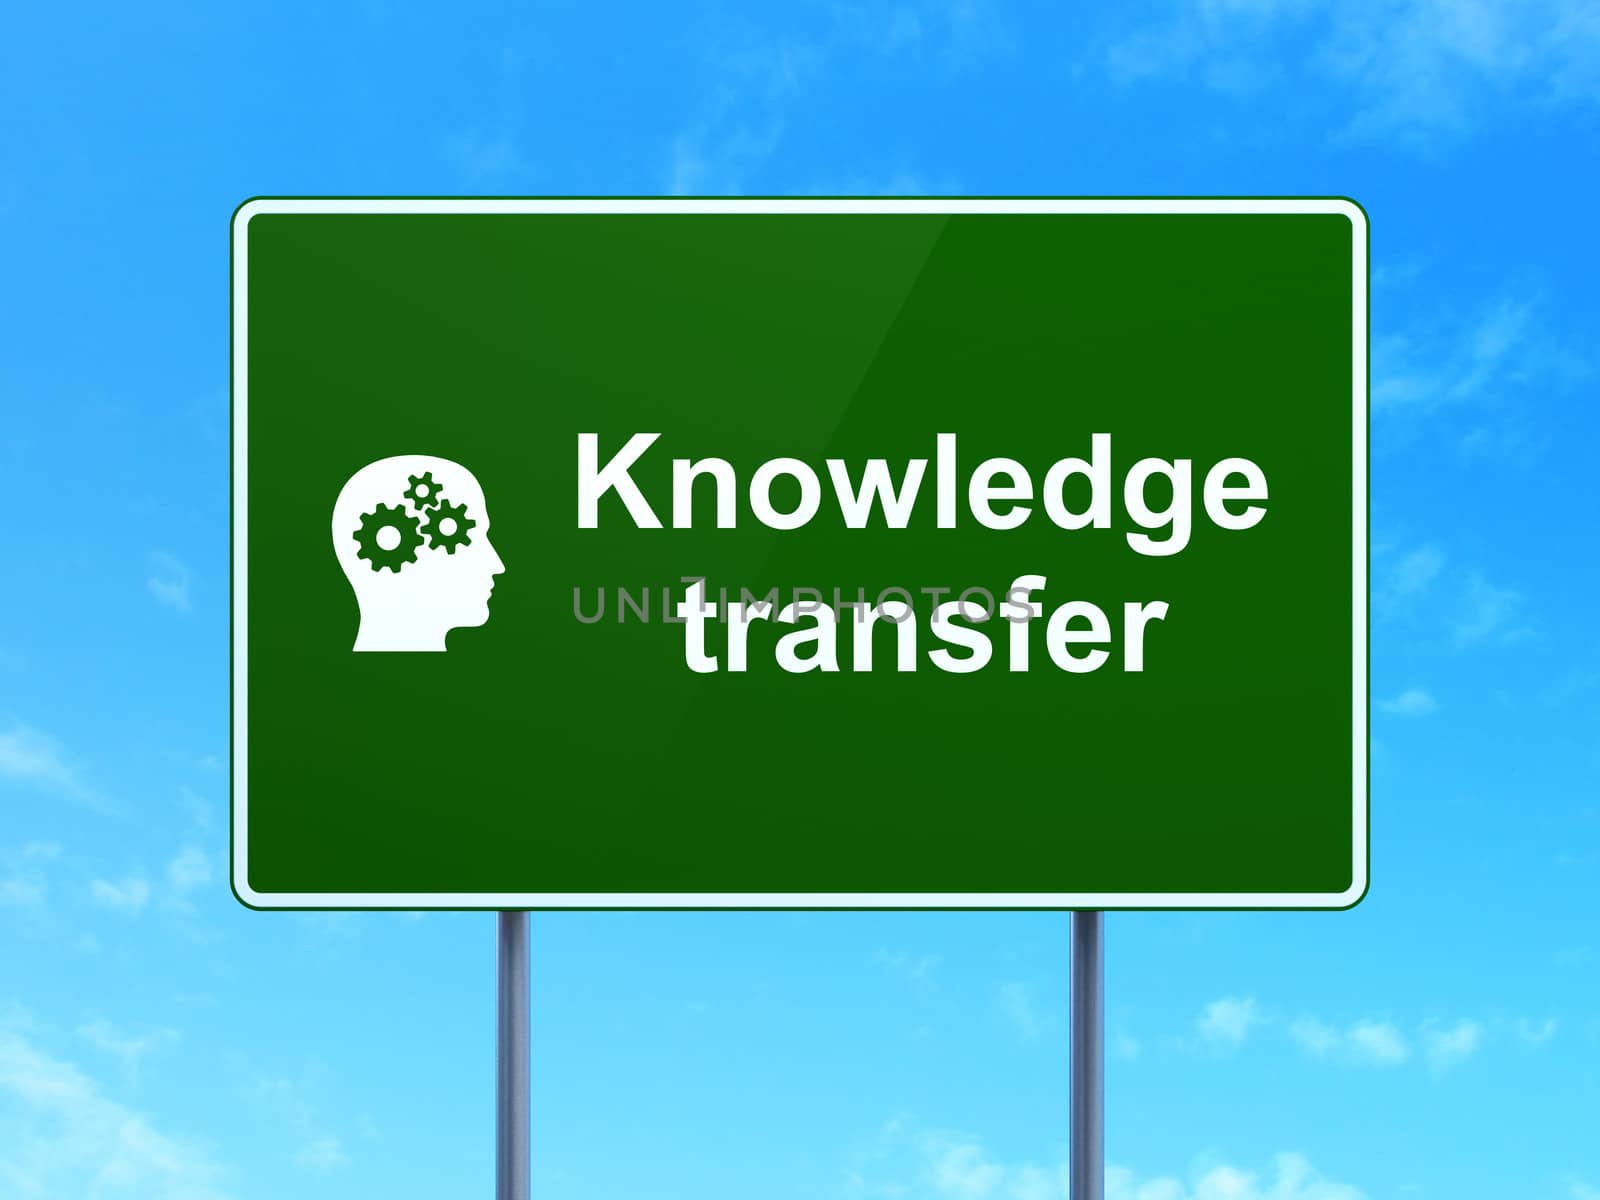 Education concept: Knowledge Transfer and Head With Gears icon on green road (highway) sign, clear blue sky background, 3d render